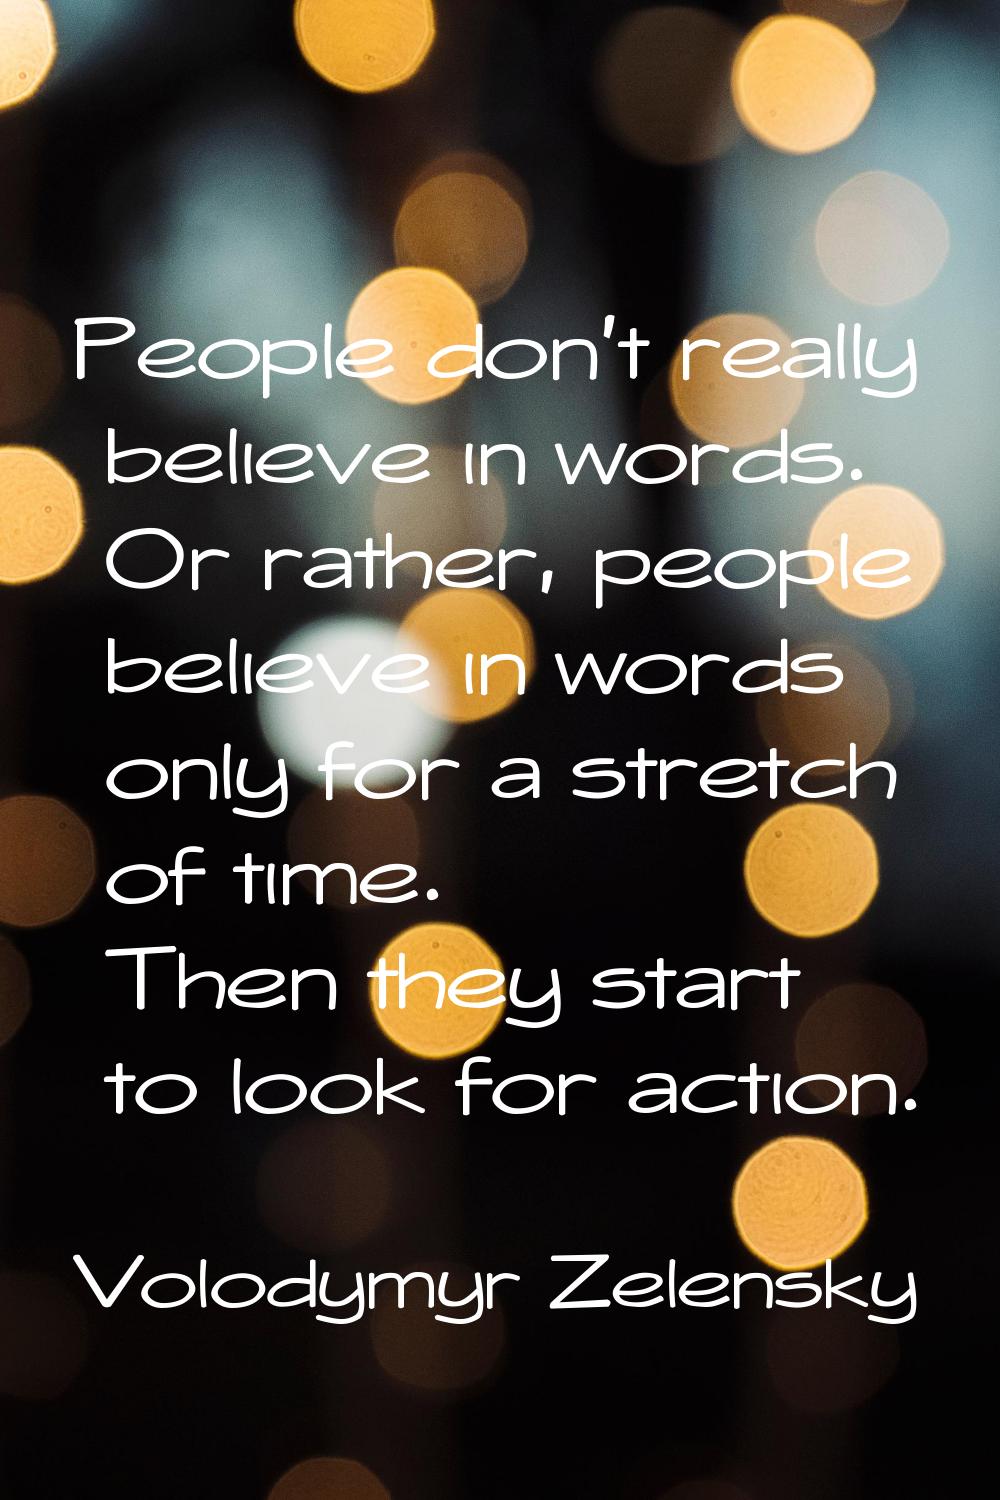 People don't really believe in words. Or rather, people believe in words only for a stretch of time